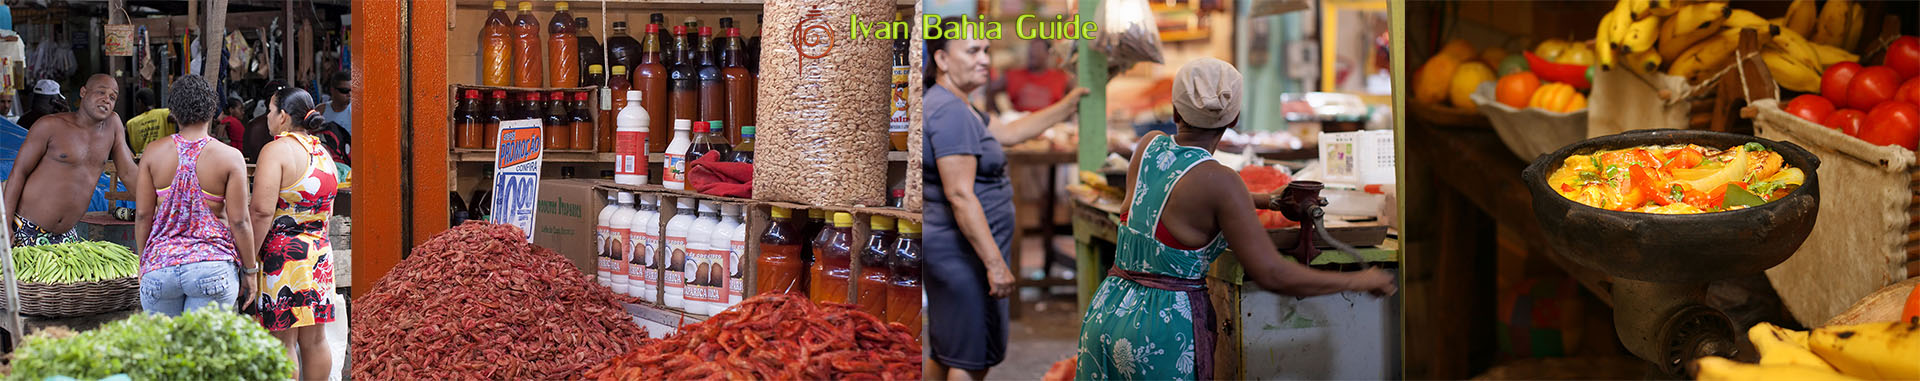 Ivan Bahia Guide, buy fish & vegetables on the market and learn to cook moqueca with your personal Chef